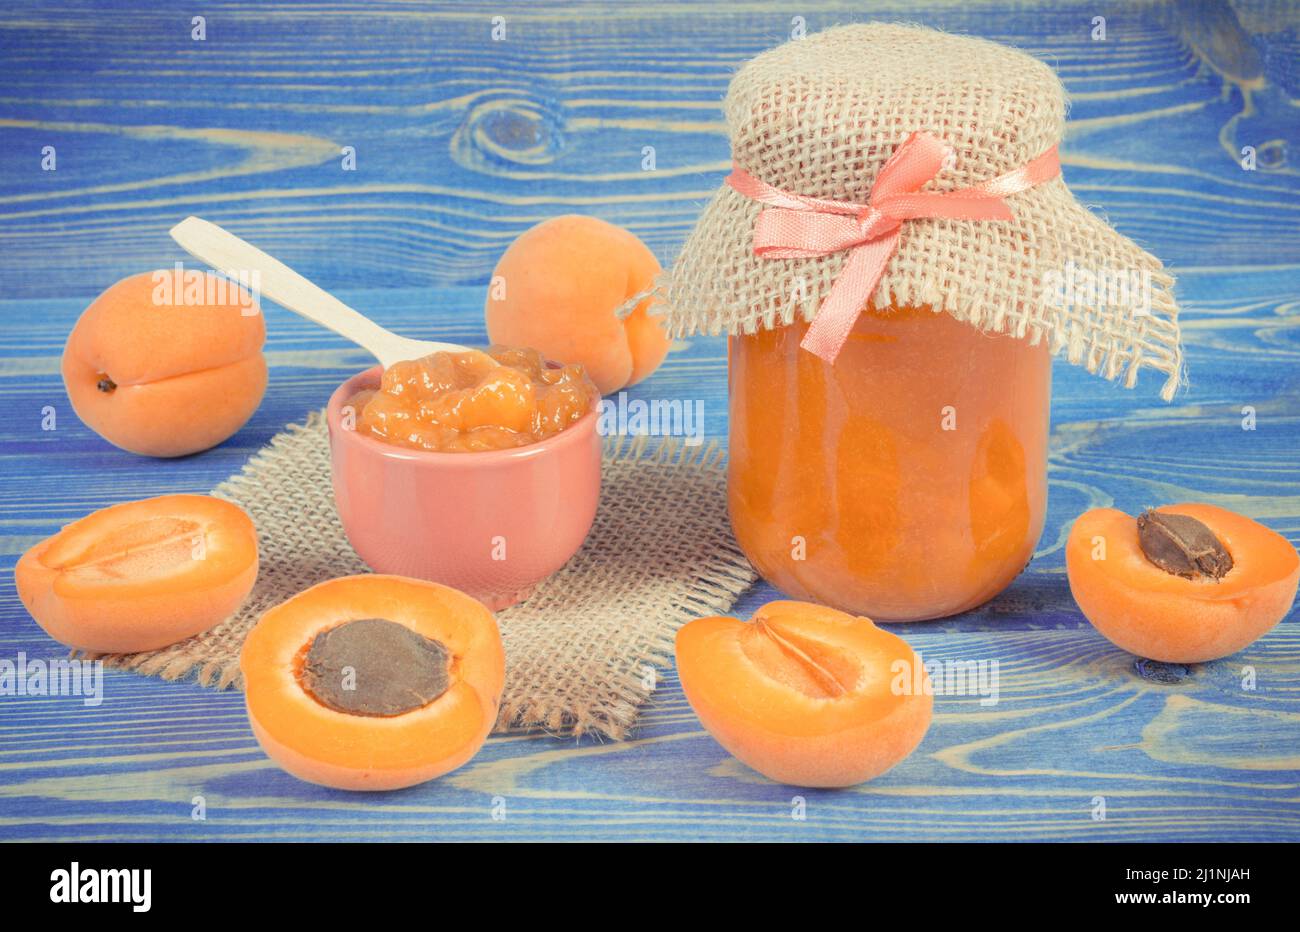 Fresh homemade apricot marmalade and ripe fruits on blue boards, concept of healthy sweet dessert Stock Photo